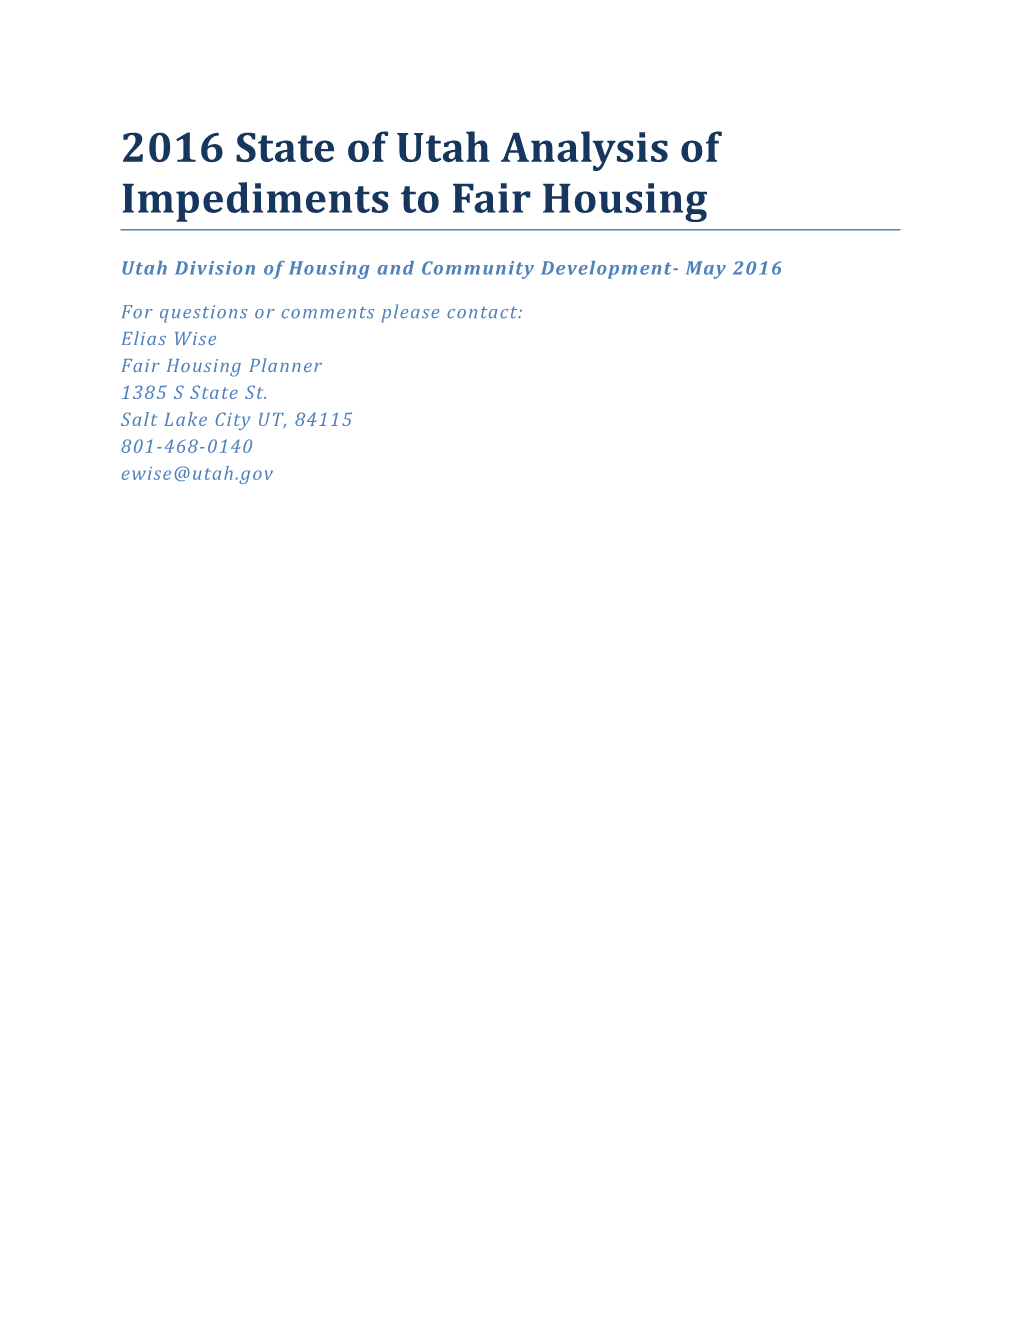 2016 State of Utah Analysis of Impediments to Fair Housing